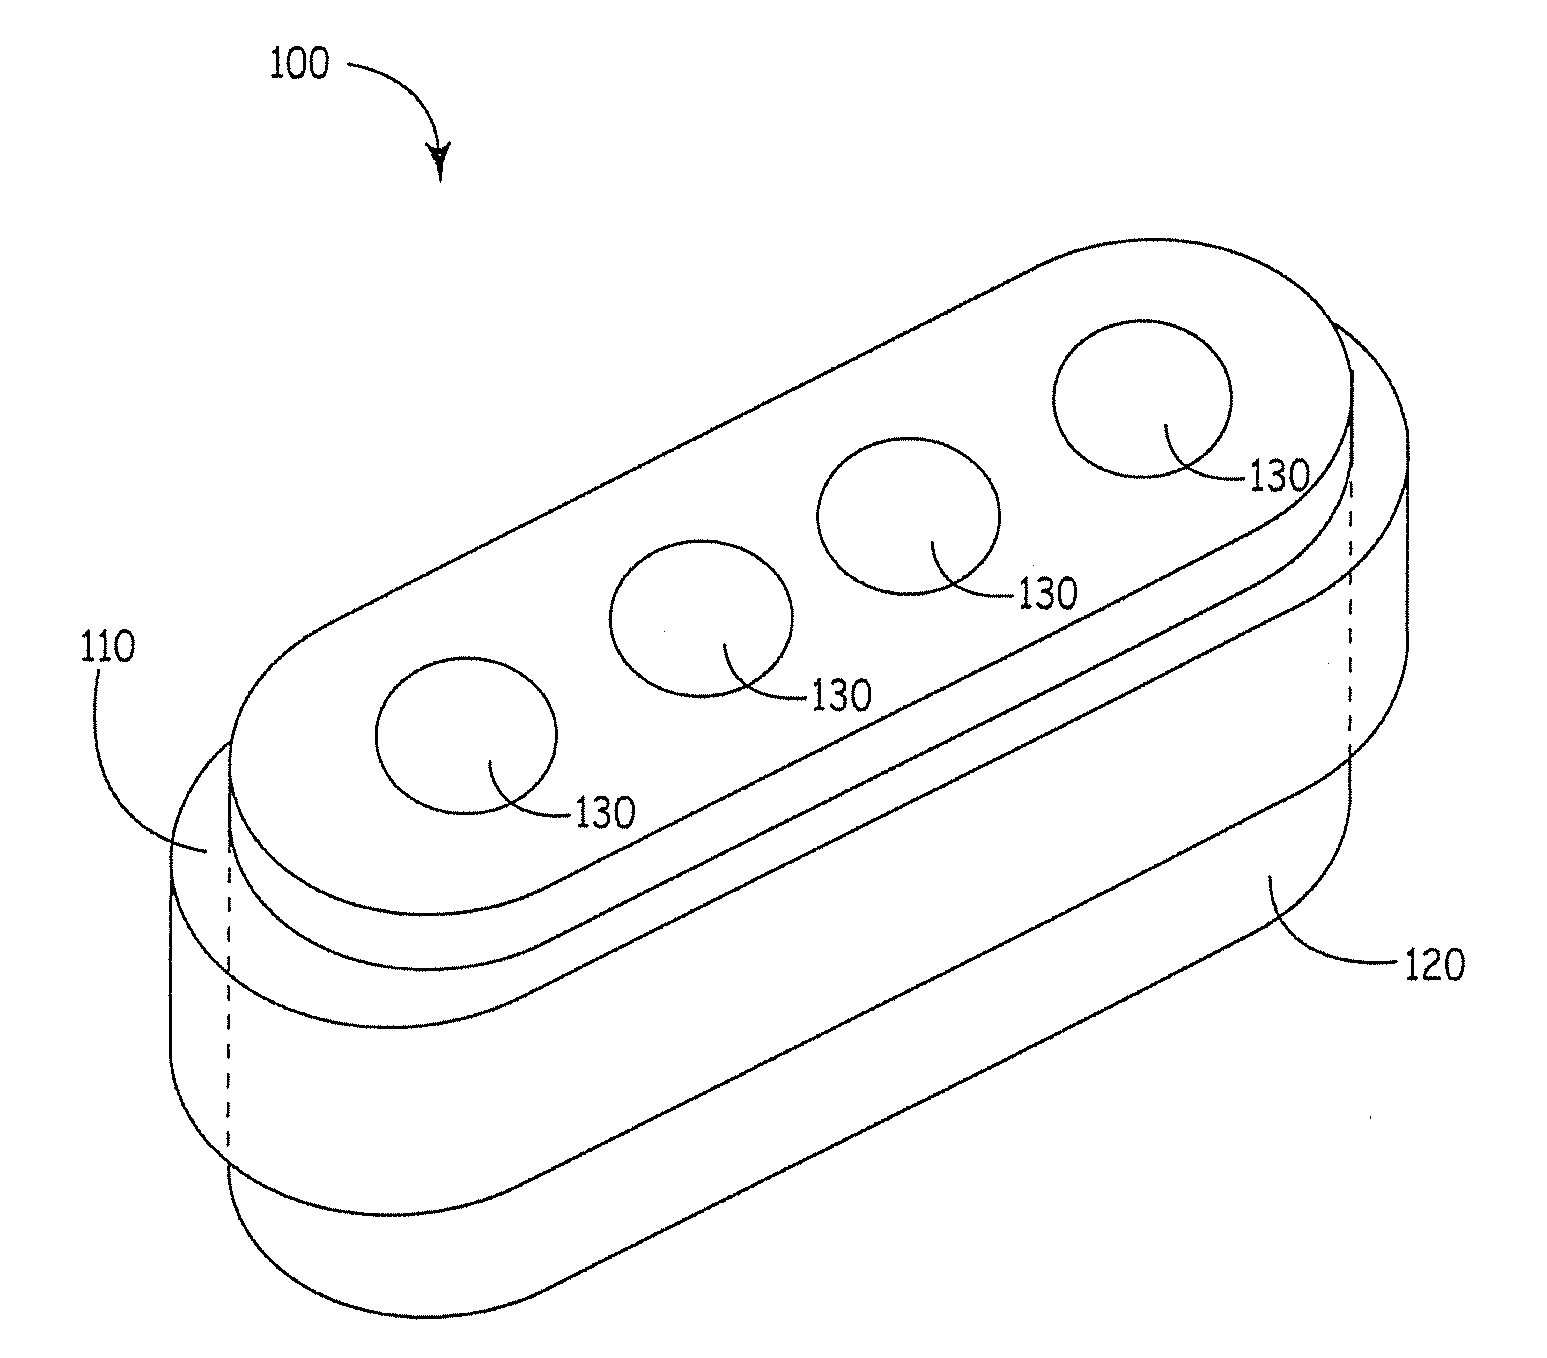 Injection molded ferrule for cofired feedthroughs